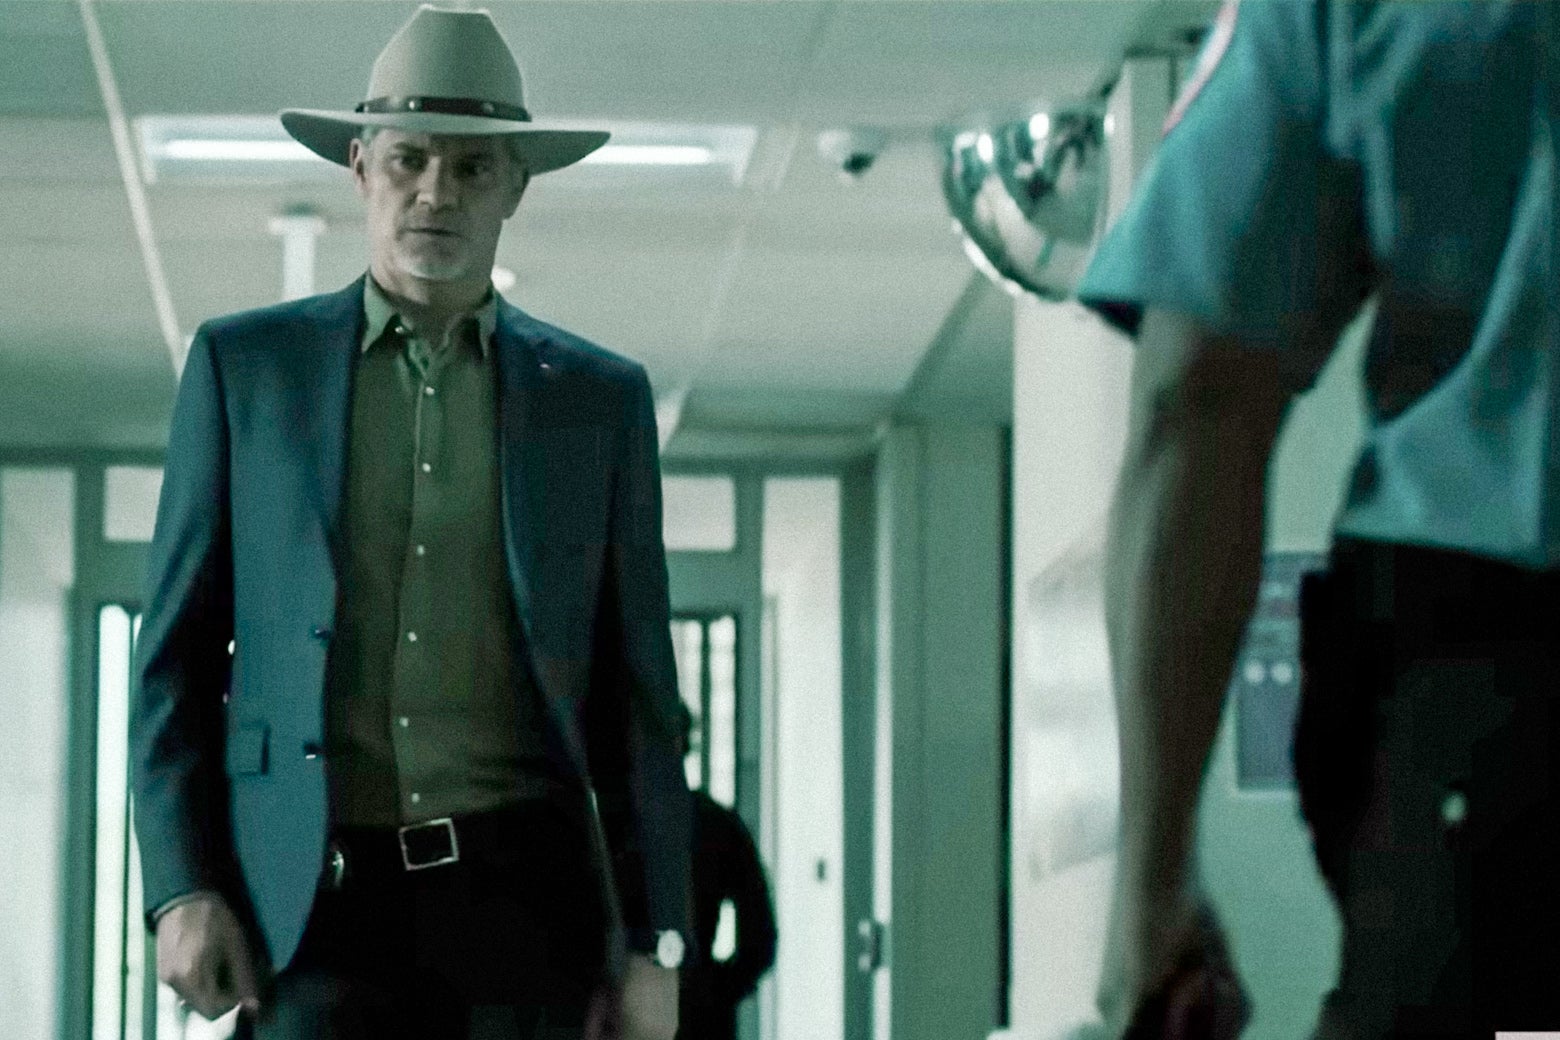 A defeated-looking man in a cowboy hat walks down a green-toned hallway, looking downward.